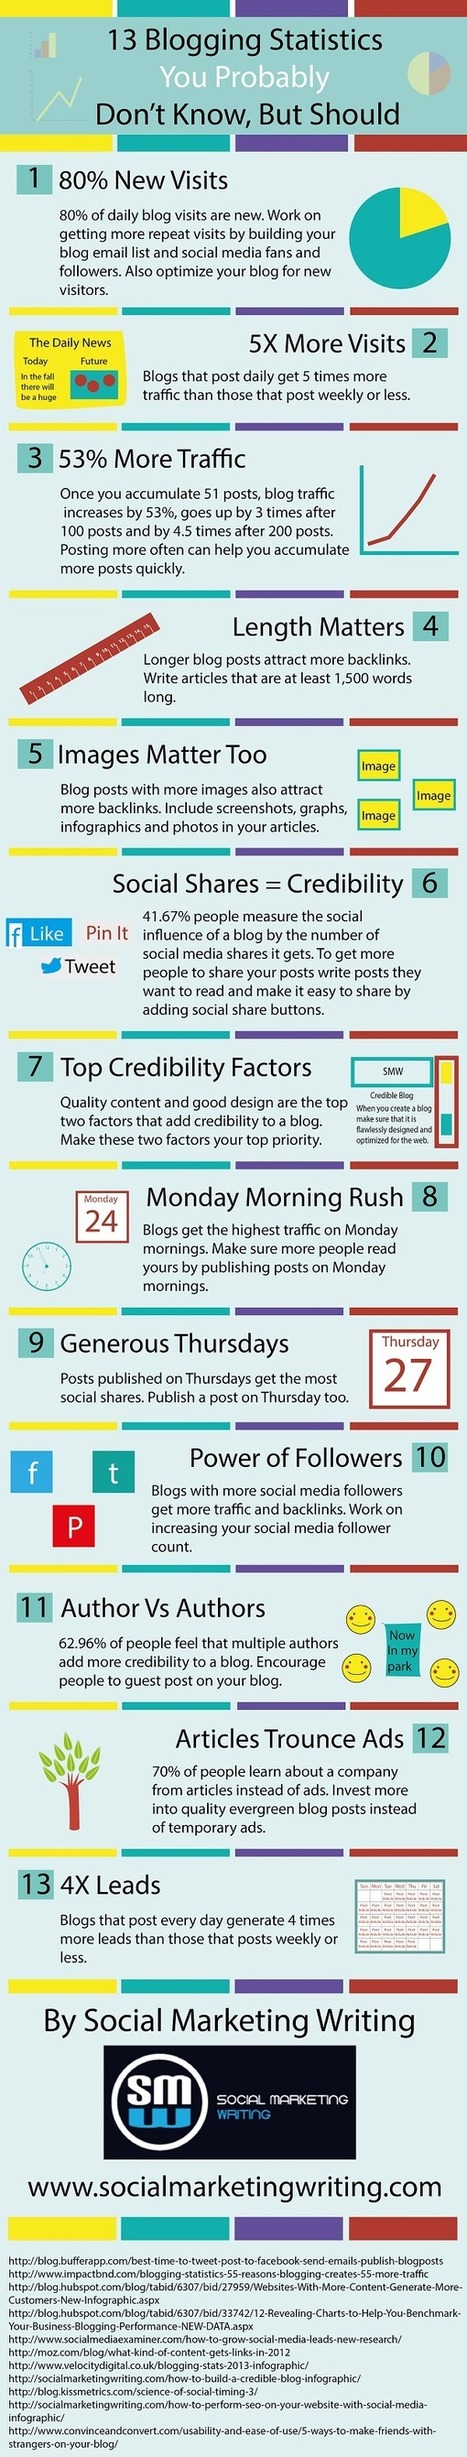 13 Blogging Statistics You Probably Don’t Know, But Should [Infographic] | Ukr-Content-Curator | Scoop.it